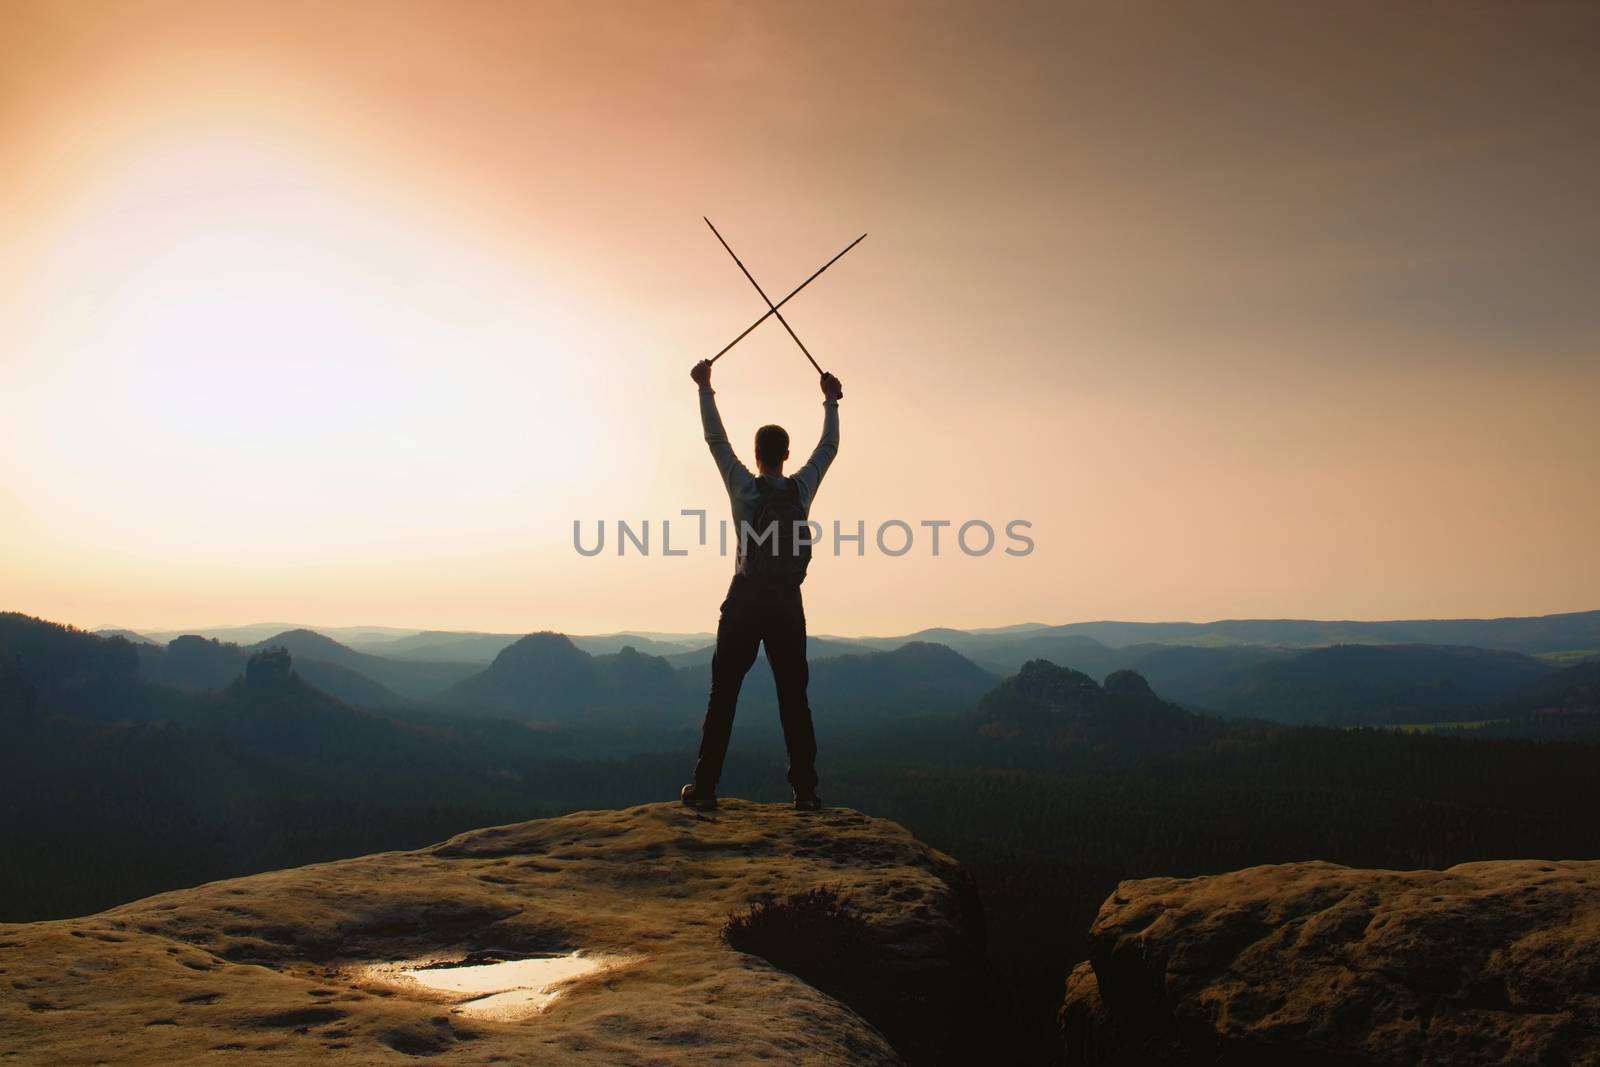 Man with crossed poles above head on cliff.  Foggy  mountain valley bellow.  Sunny spring daybreak in hills. by rdonar2